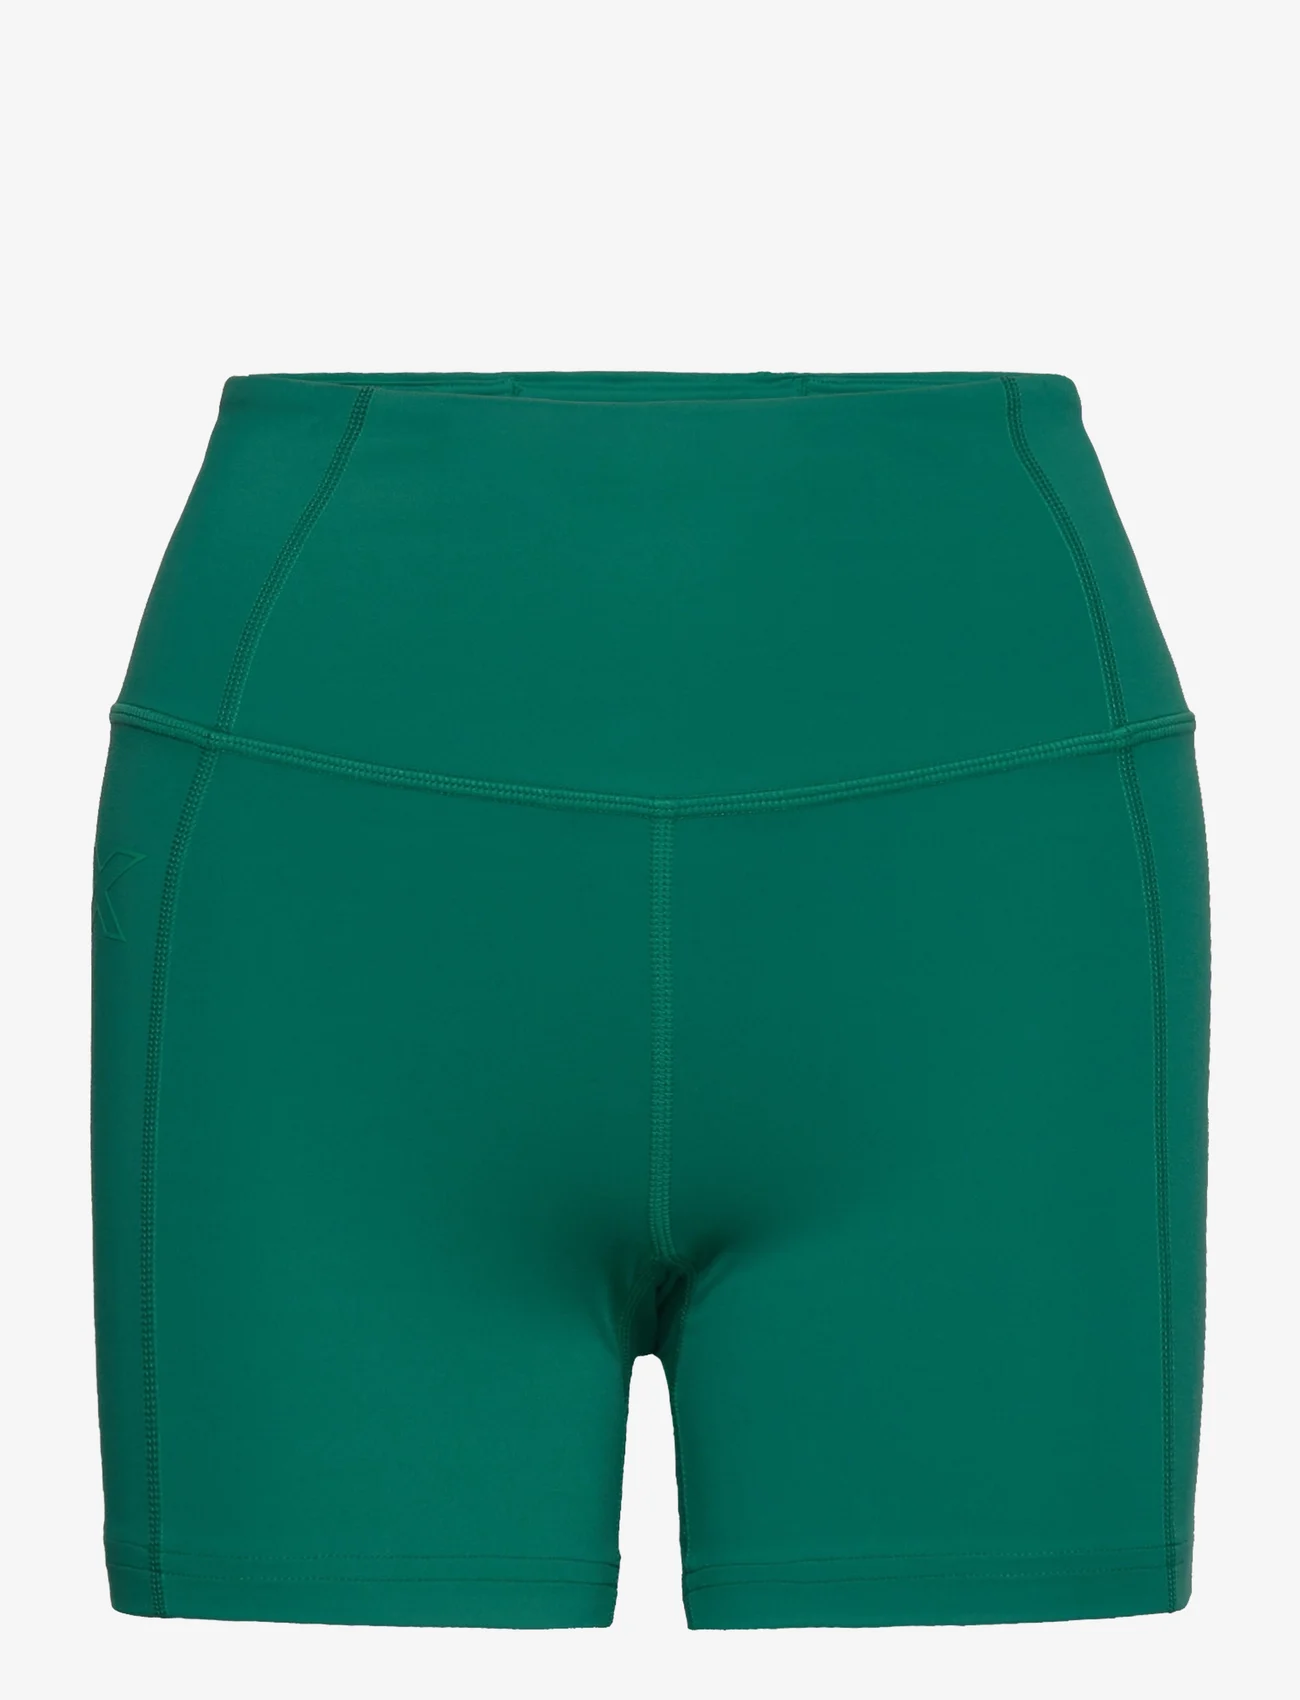 2XU - FORM HI-RISE COMP SHORTS - cycling shorts - forest green/forest green - 0